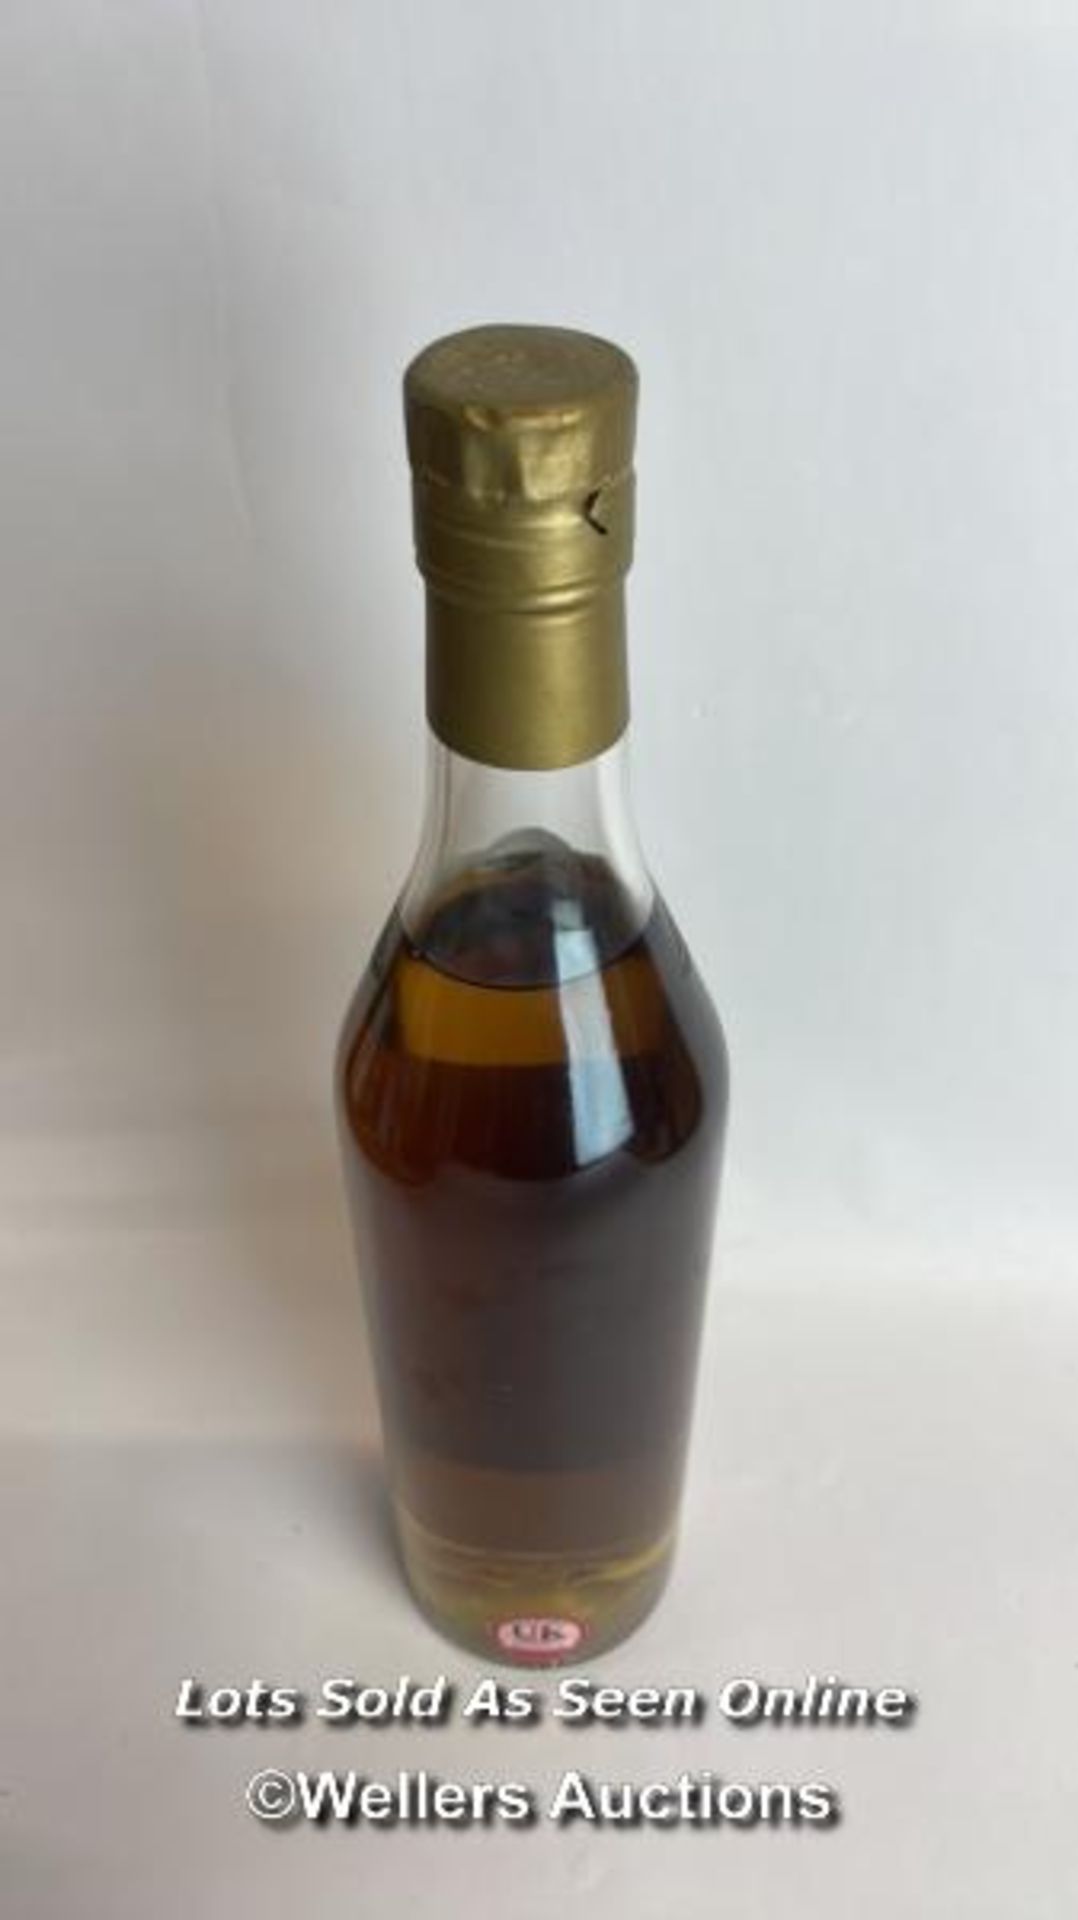 1997 The Spirit of Frosts, Single Malth Whisky, Commissioned to Mark Frosts 60th Anniversary, - Image 5 of 5